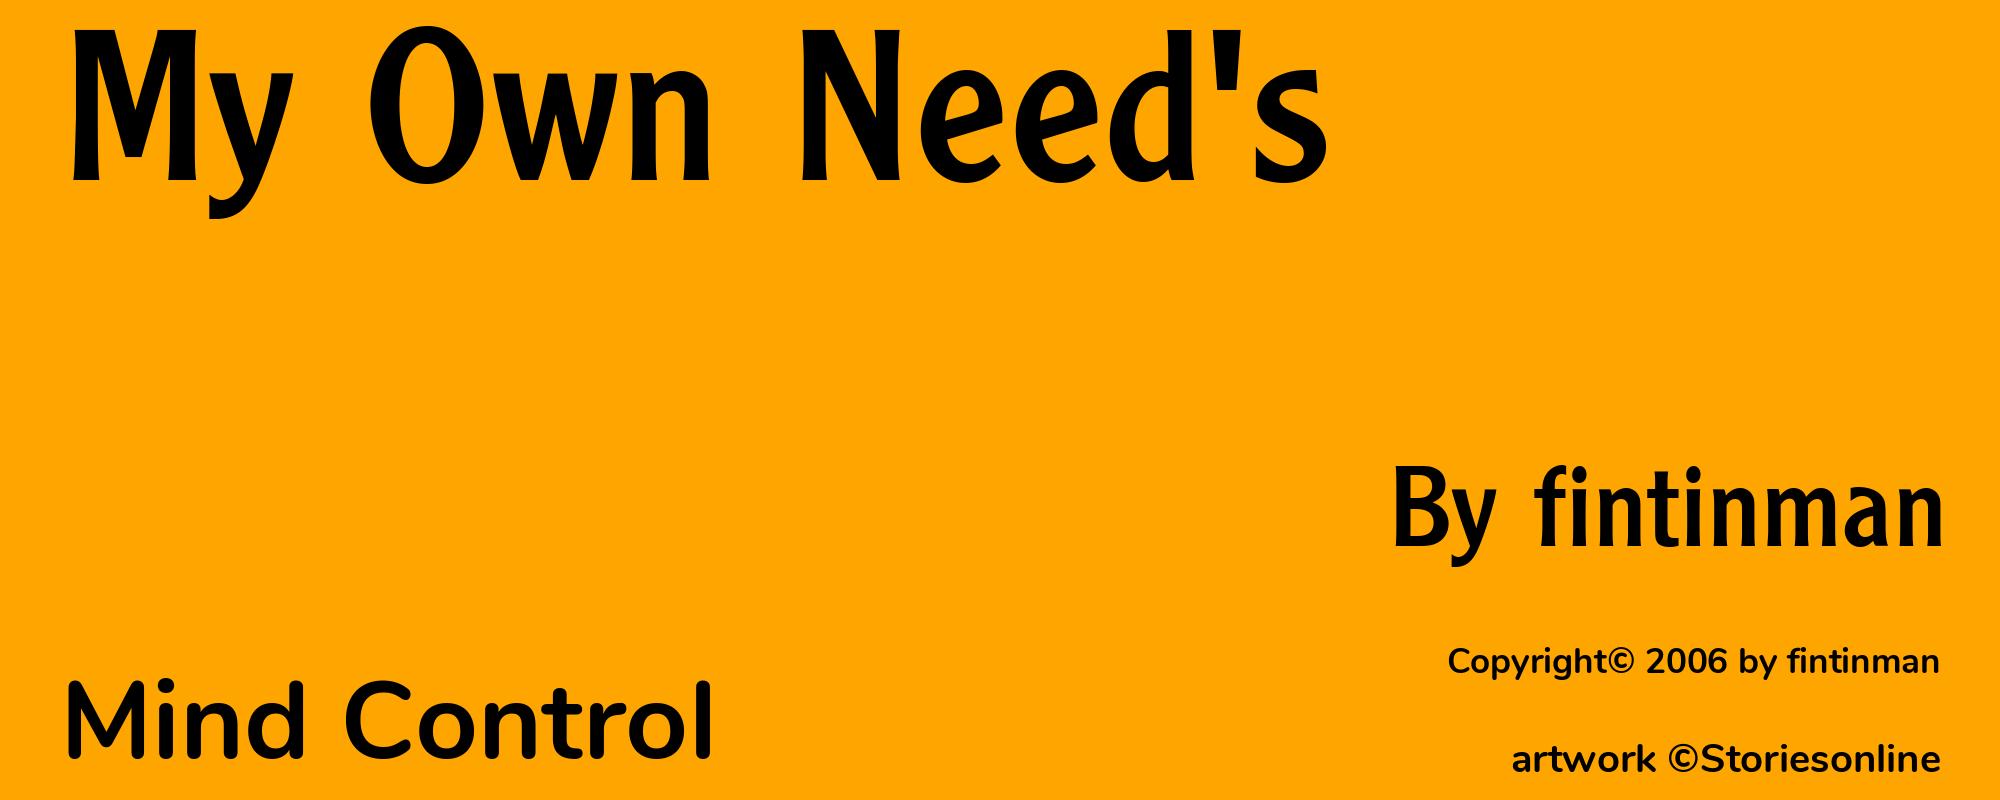 My Own Need's - Cover